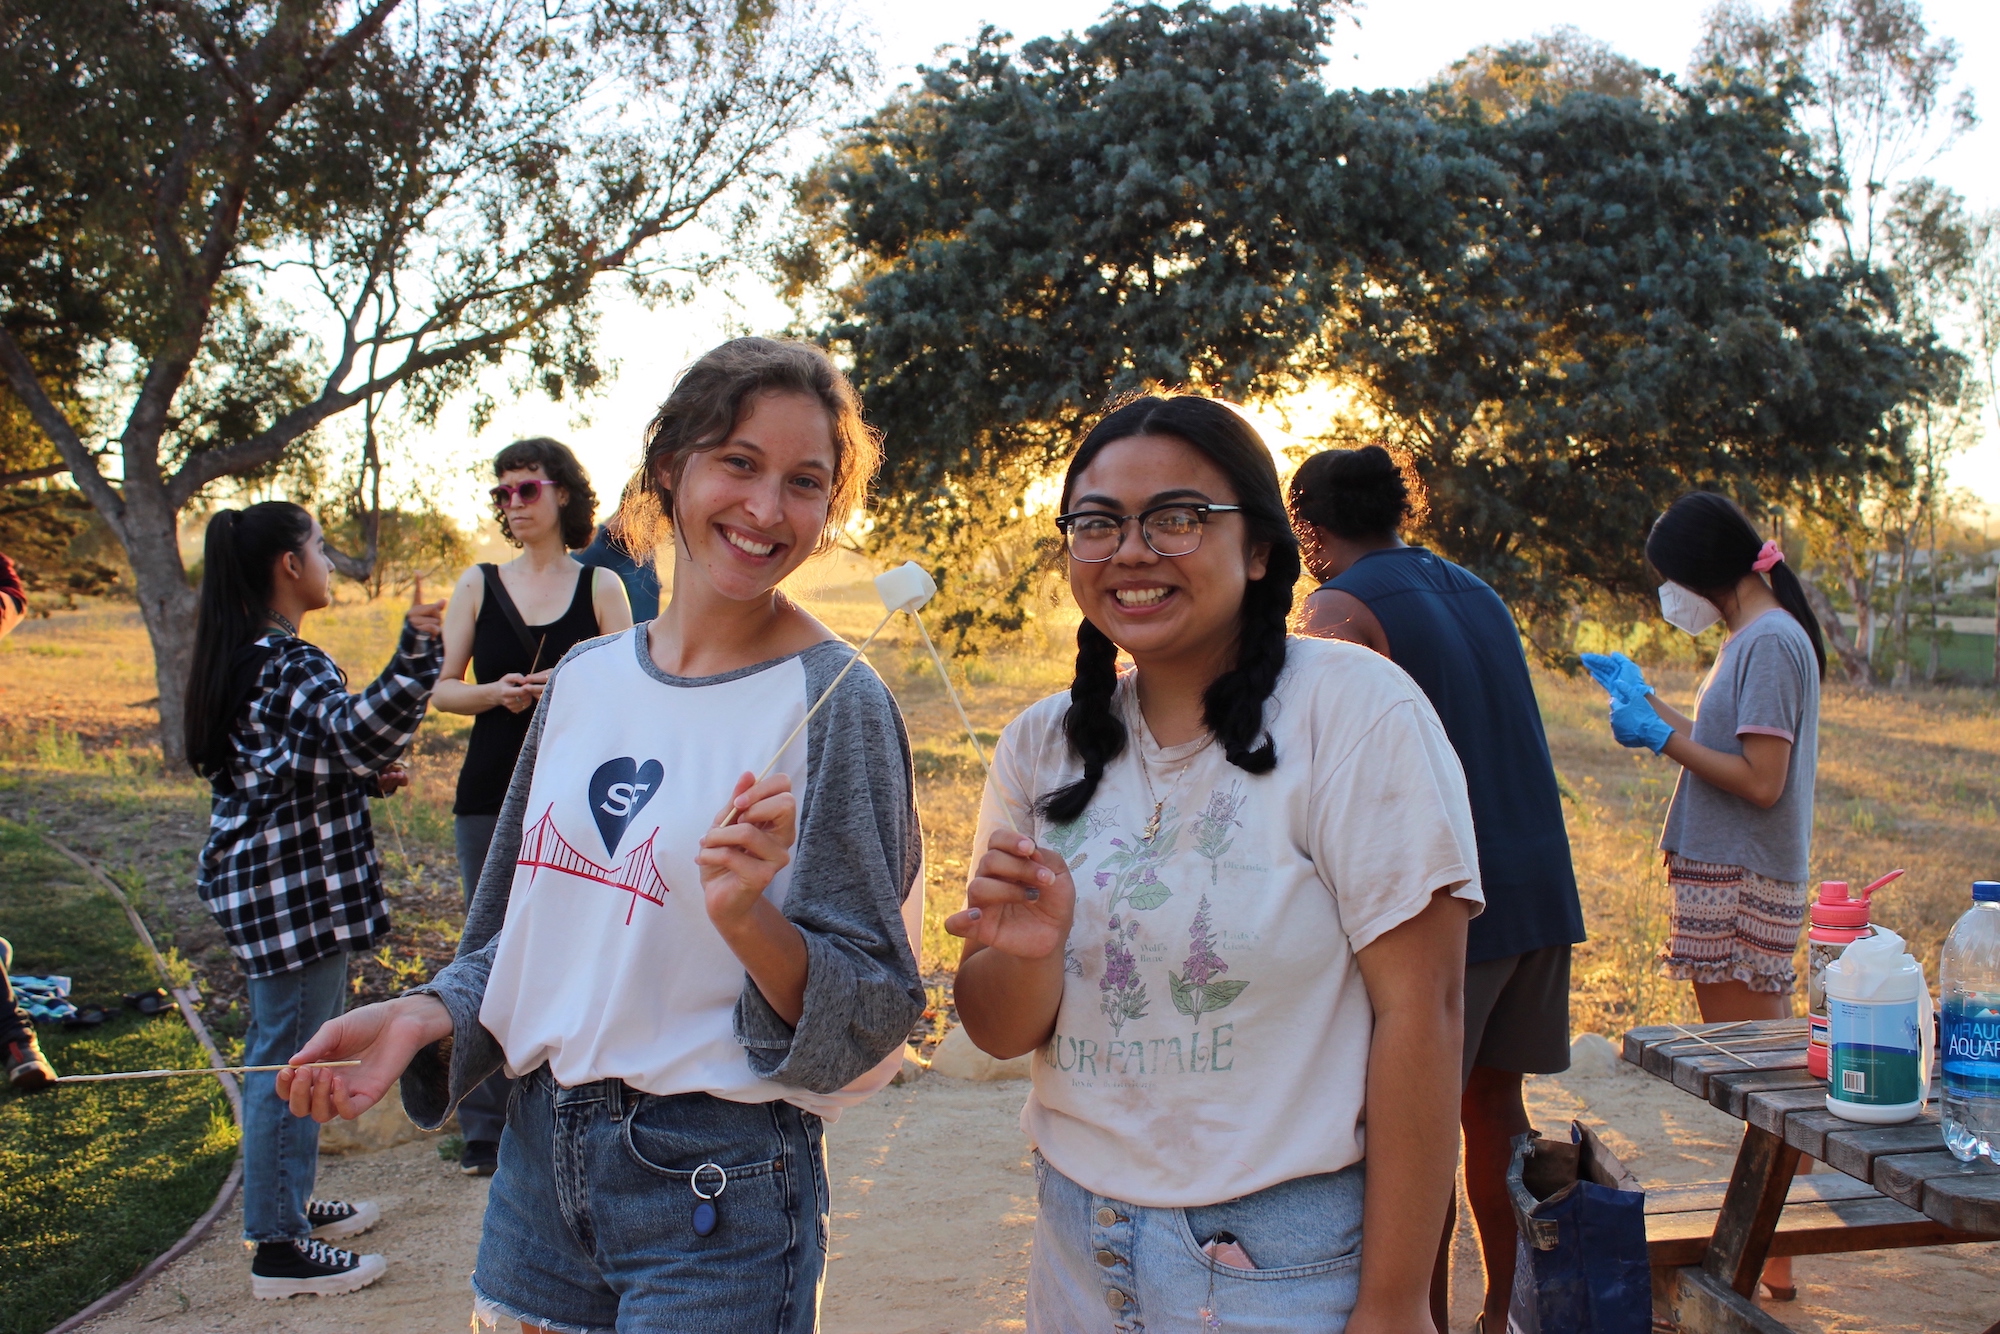 two students holding marshmallows on roasting sticks at a fireside chat